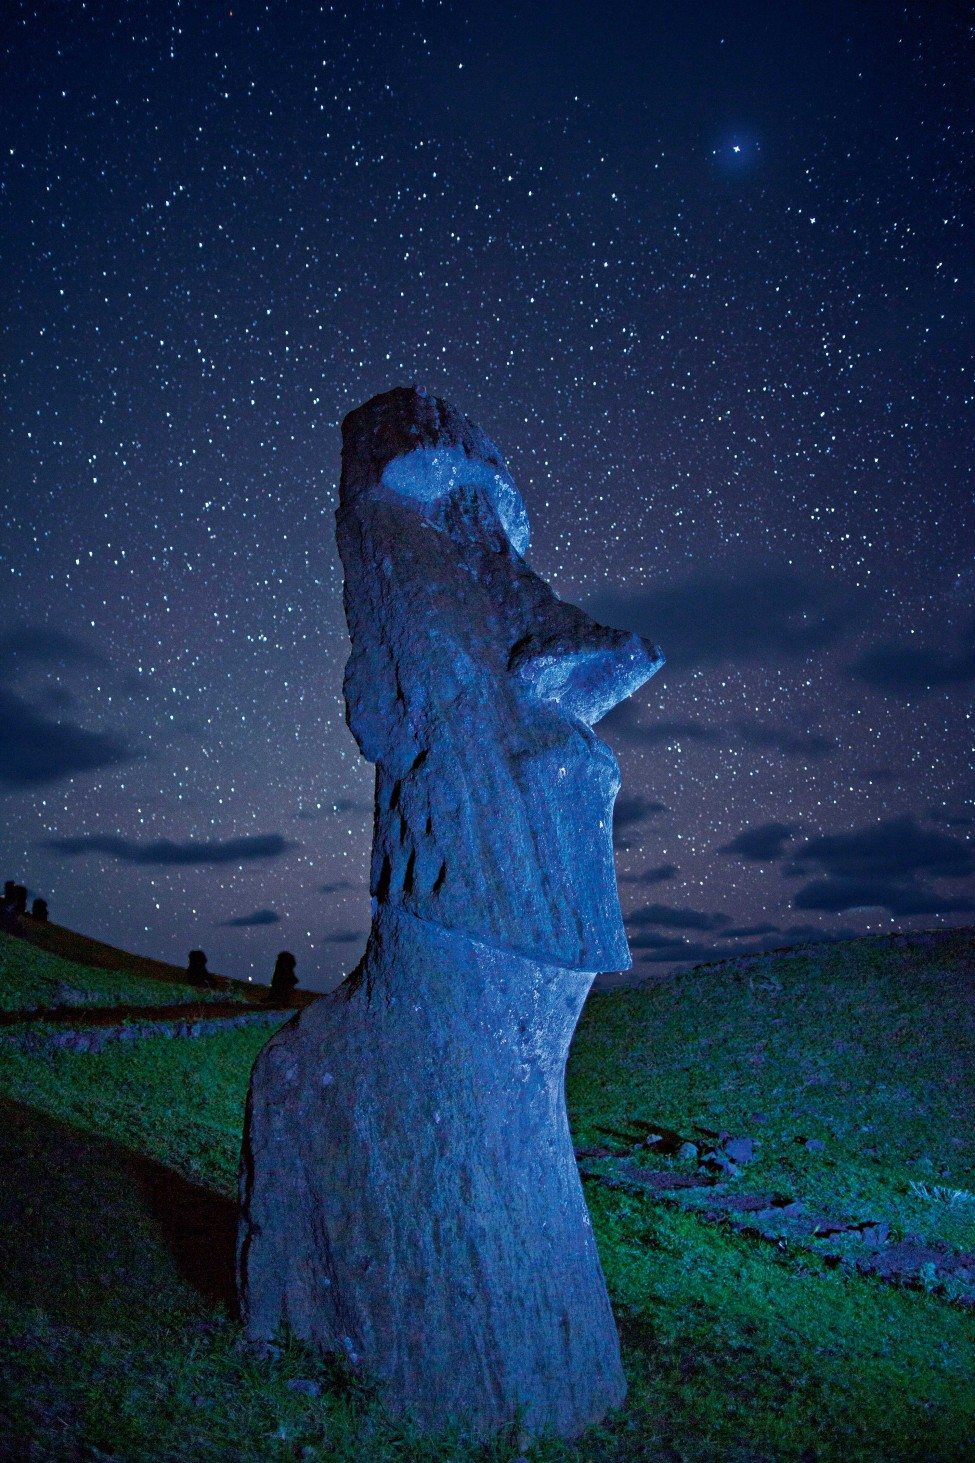 An ancient Moai statue on a hillside at night on Easter Island (Rapa Nui) in the south-eastern Pacific Ocean.  The island falls within Chilean territory and its government has proposed the Easter Island Marine Park, which would protect more than 630,000 square kilometres of ocean. <br />
Photo by Randy Olson | National Geographic Creative